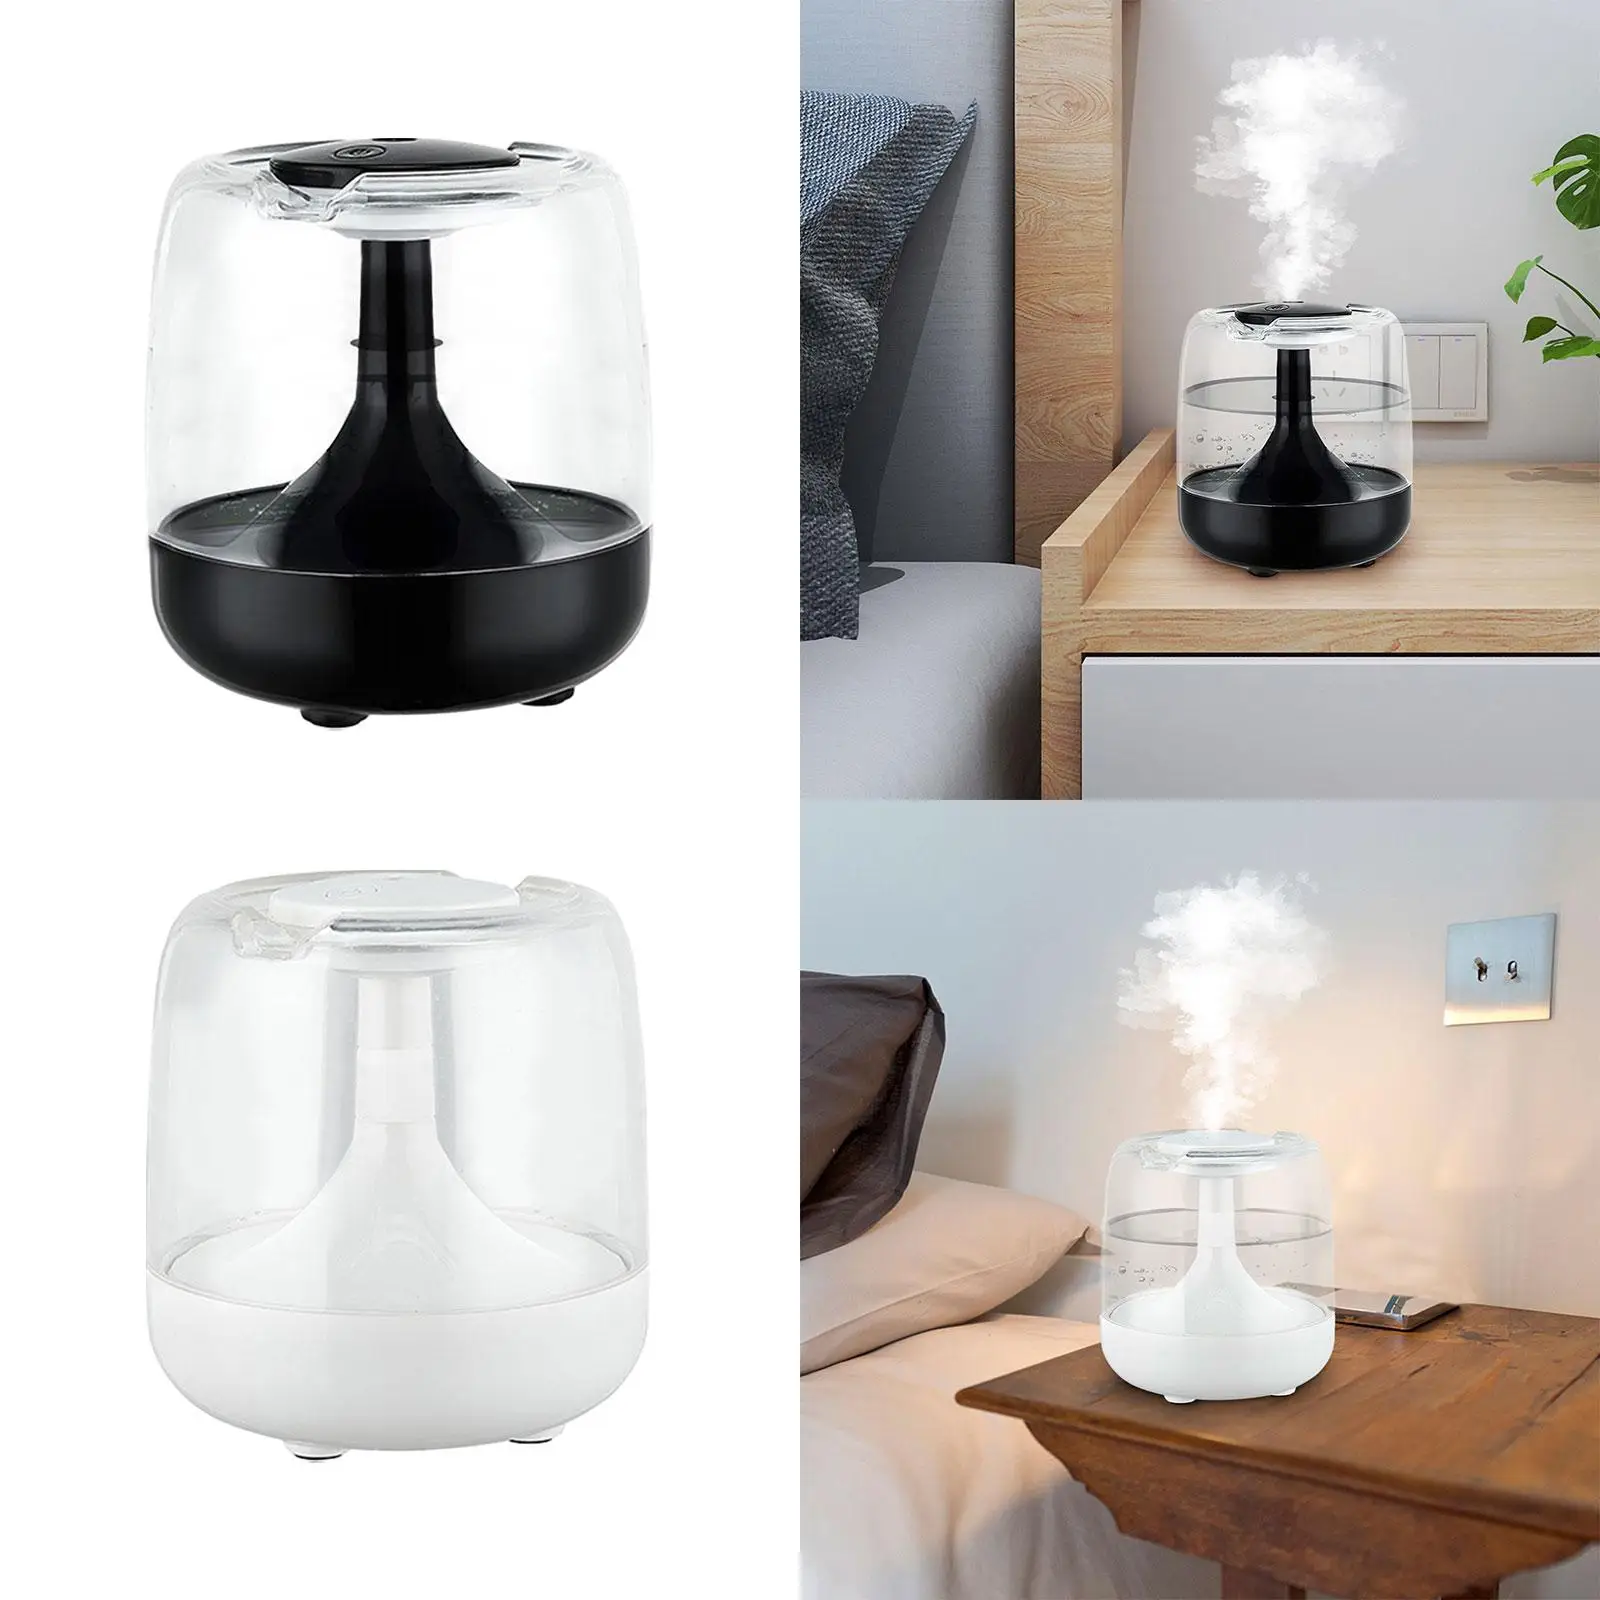 0.65L Mist Personal Humidifier with 7 Colors Lights Two Mist Modes Quiet Essential Oil Diffuser for Office Practical Versatile